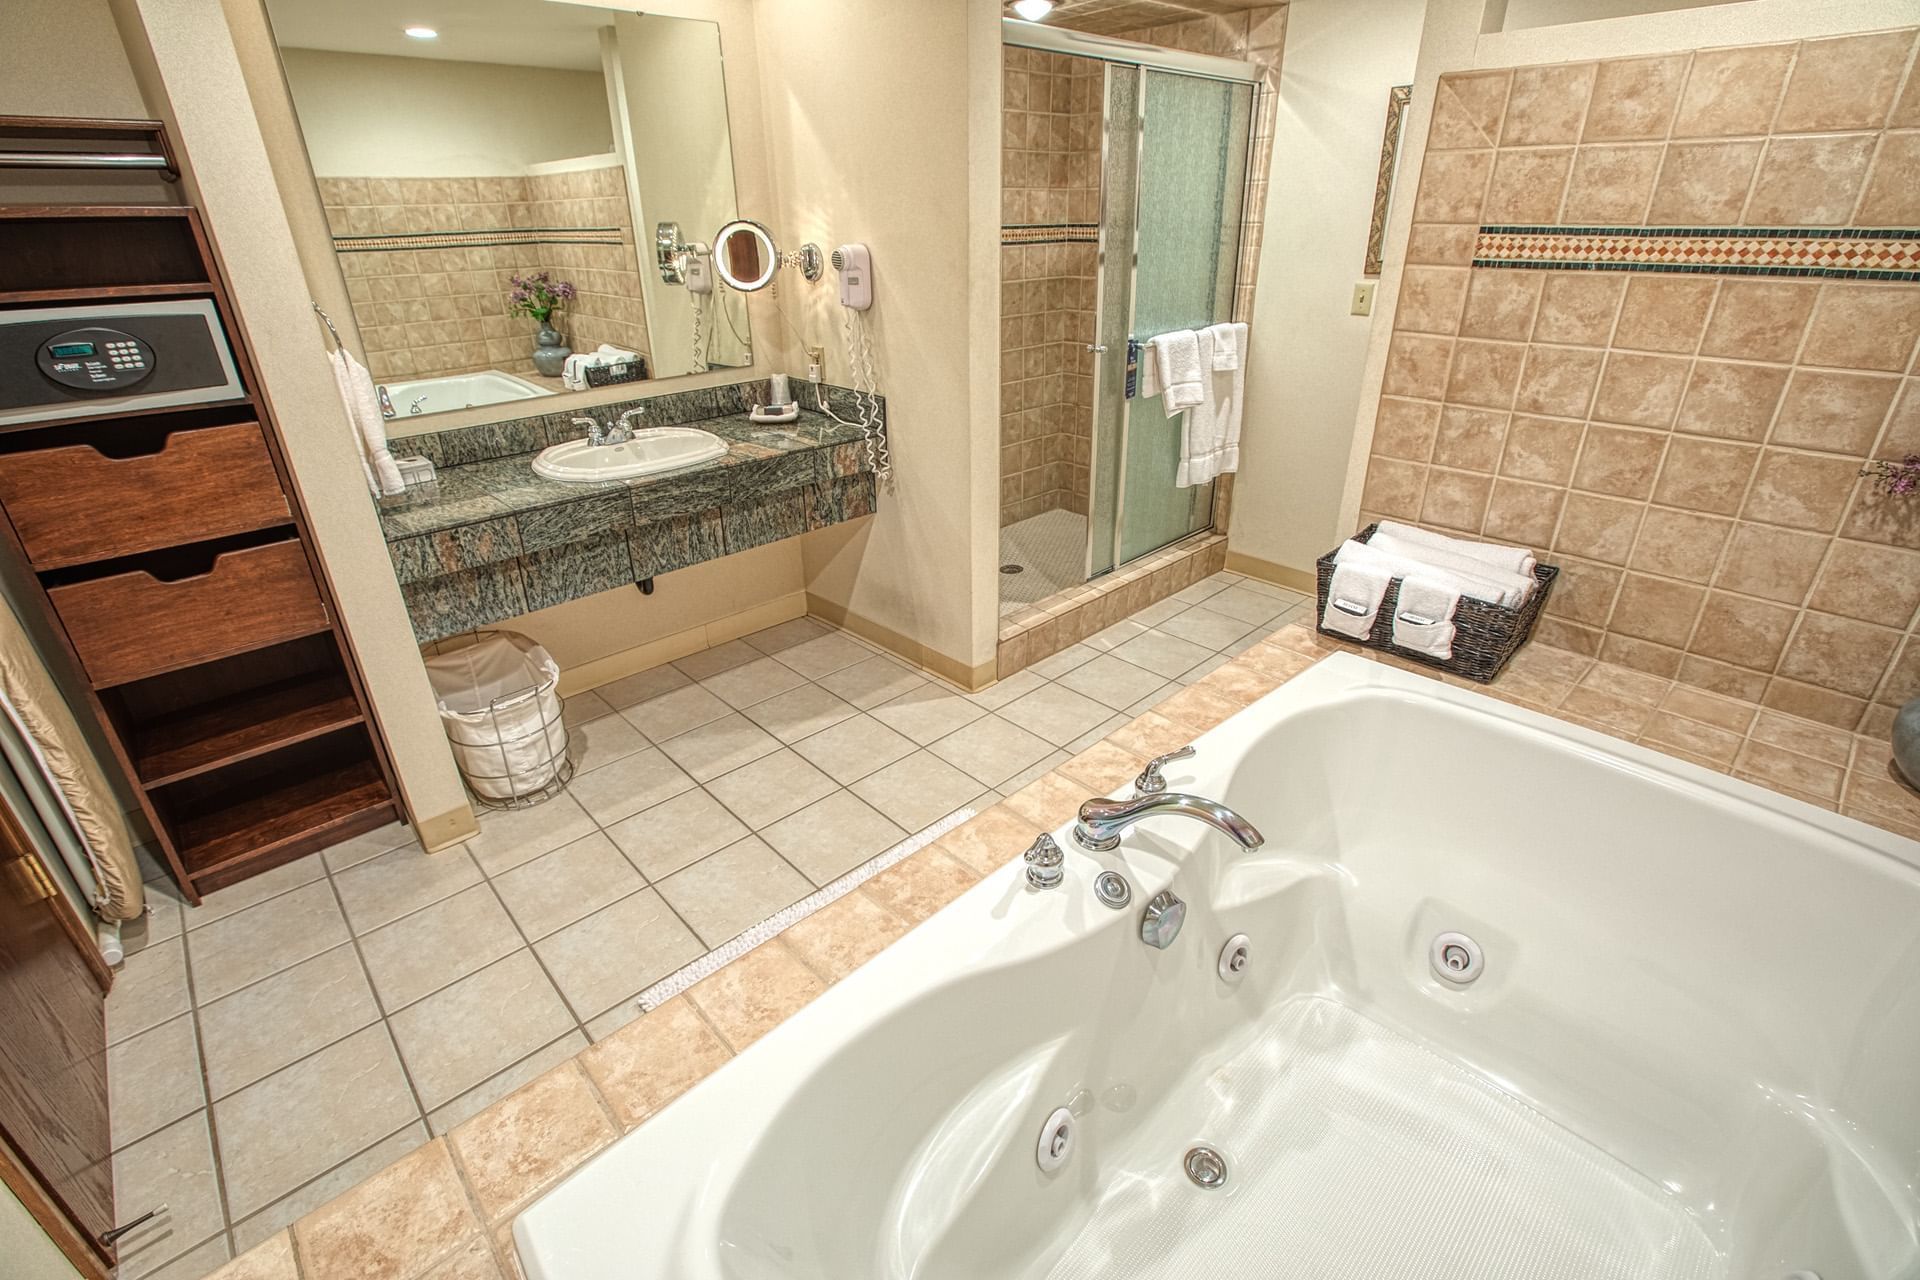 Ontario Hot Tub Suites - Hotel Rooms With Private Whirlpool Tubs